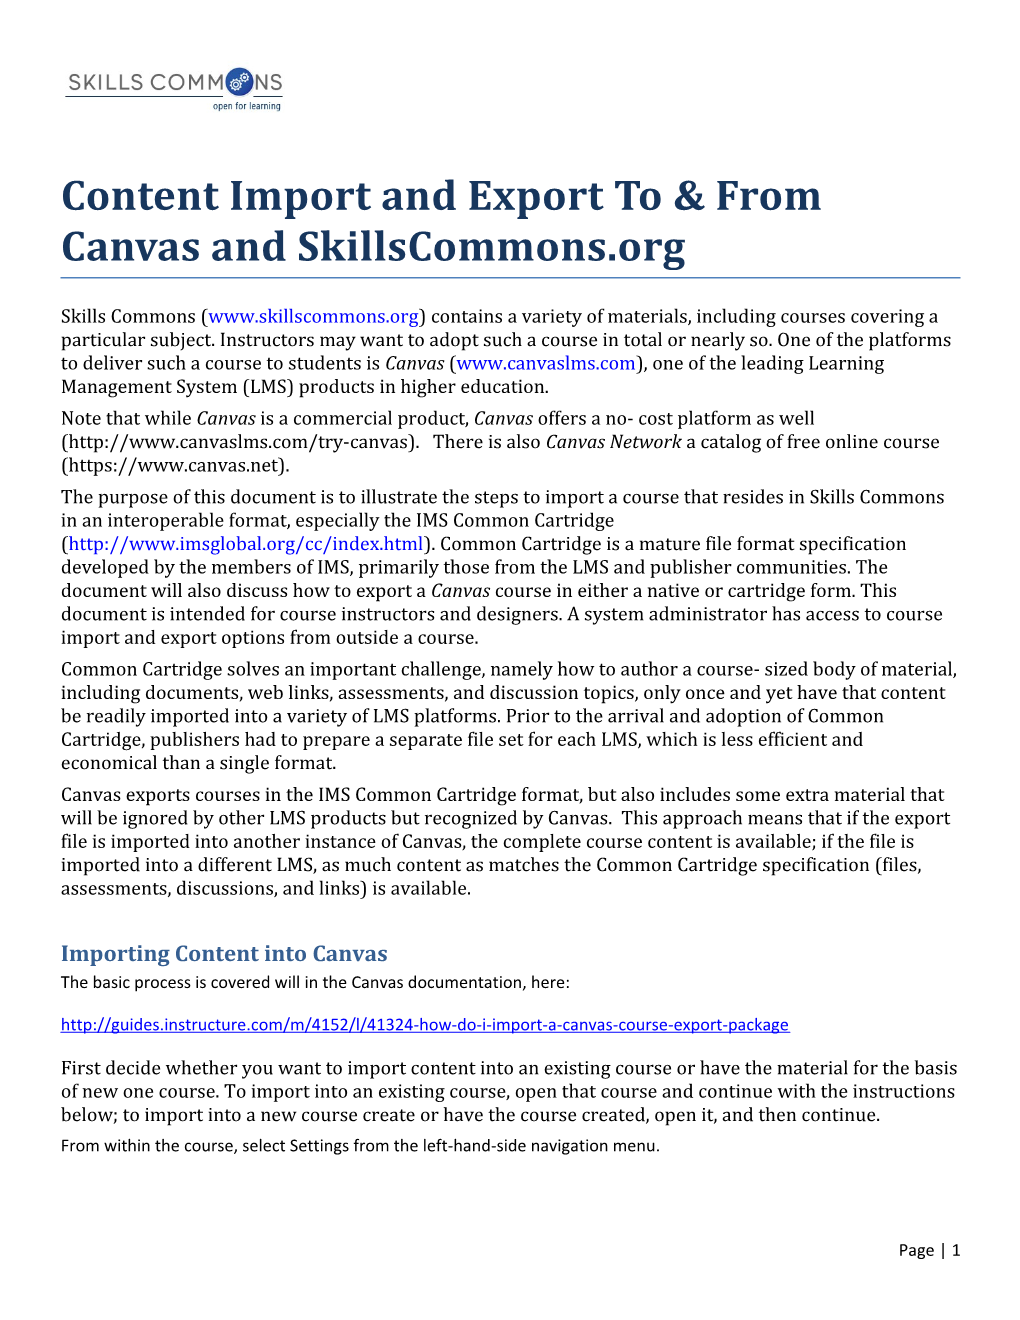 Content Import and Export to & from Canvas and Skillscommons.Org